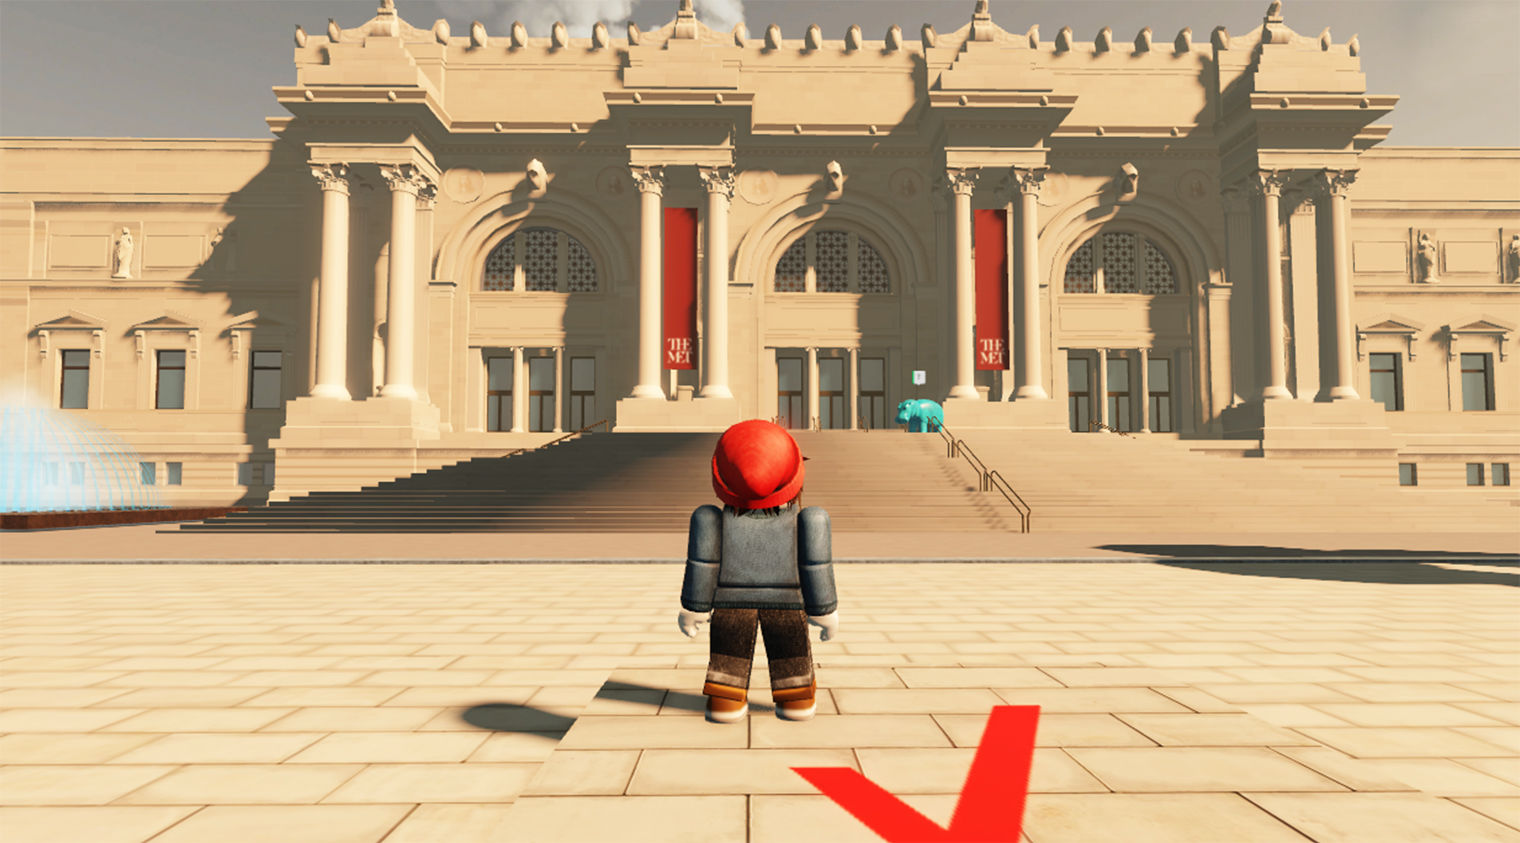 Animation of a Roblox figure standing in front of The Met